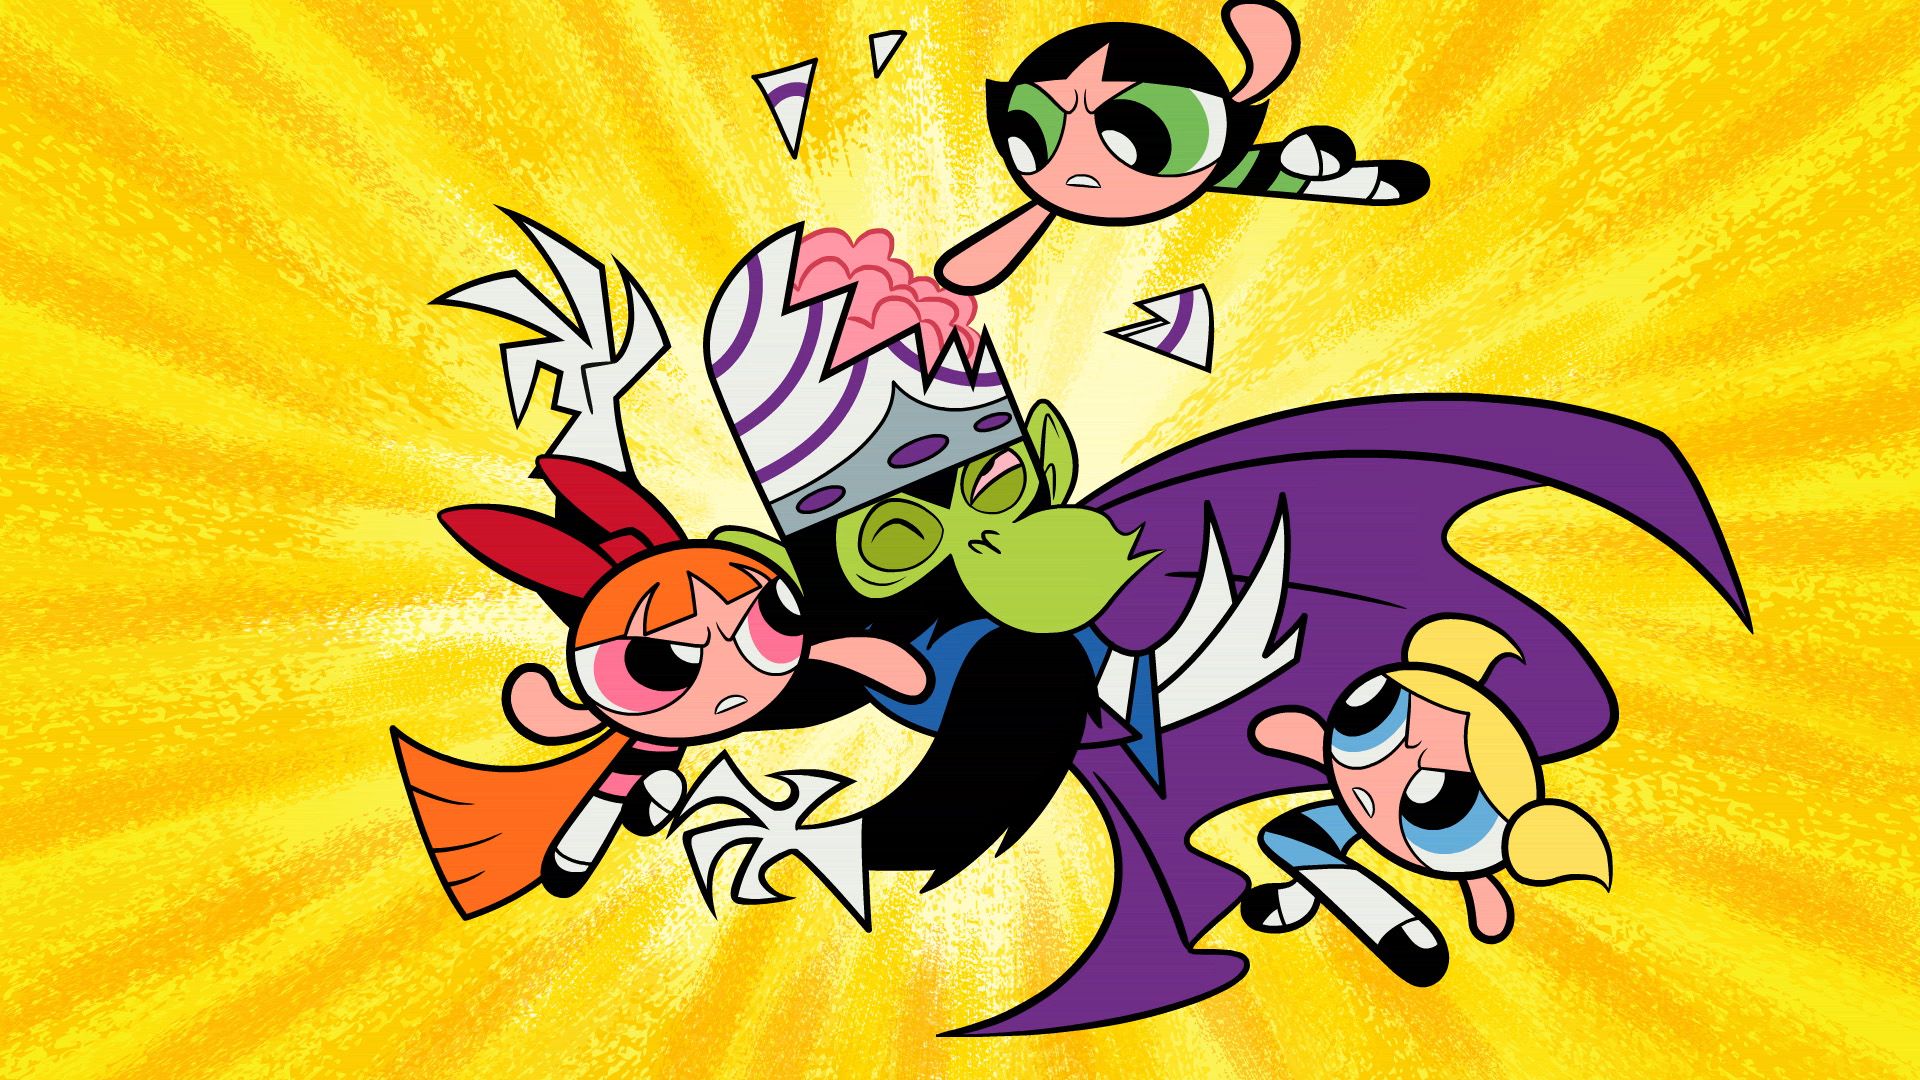 The Powerpuff Girls Wallpaper For Your Pc, Mobile